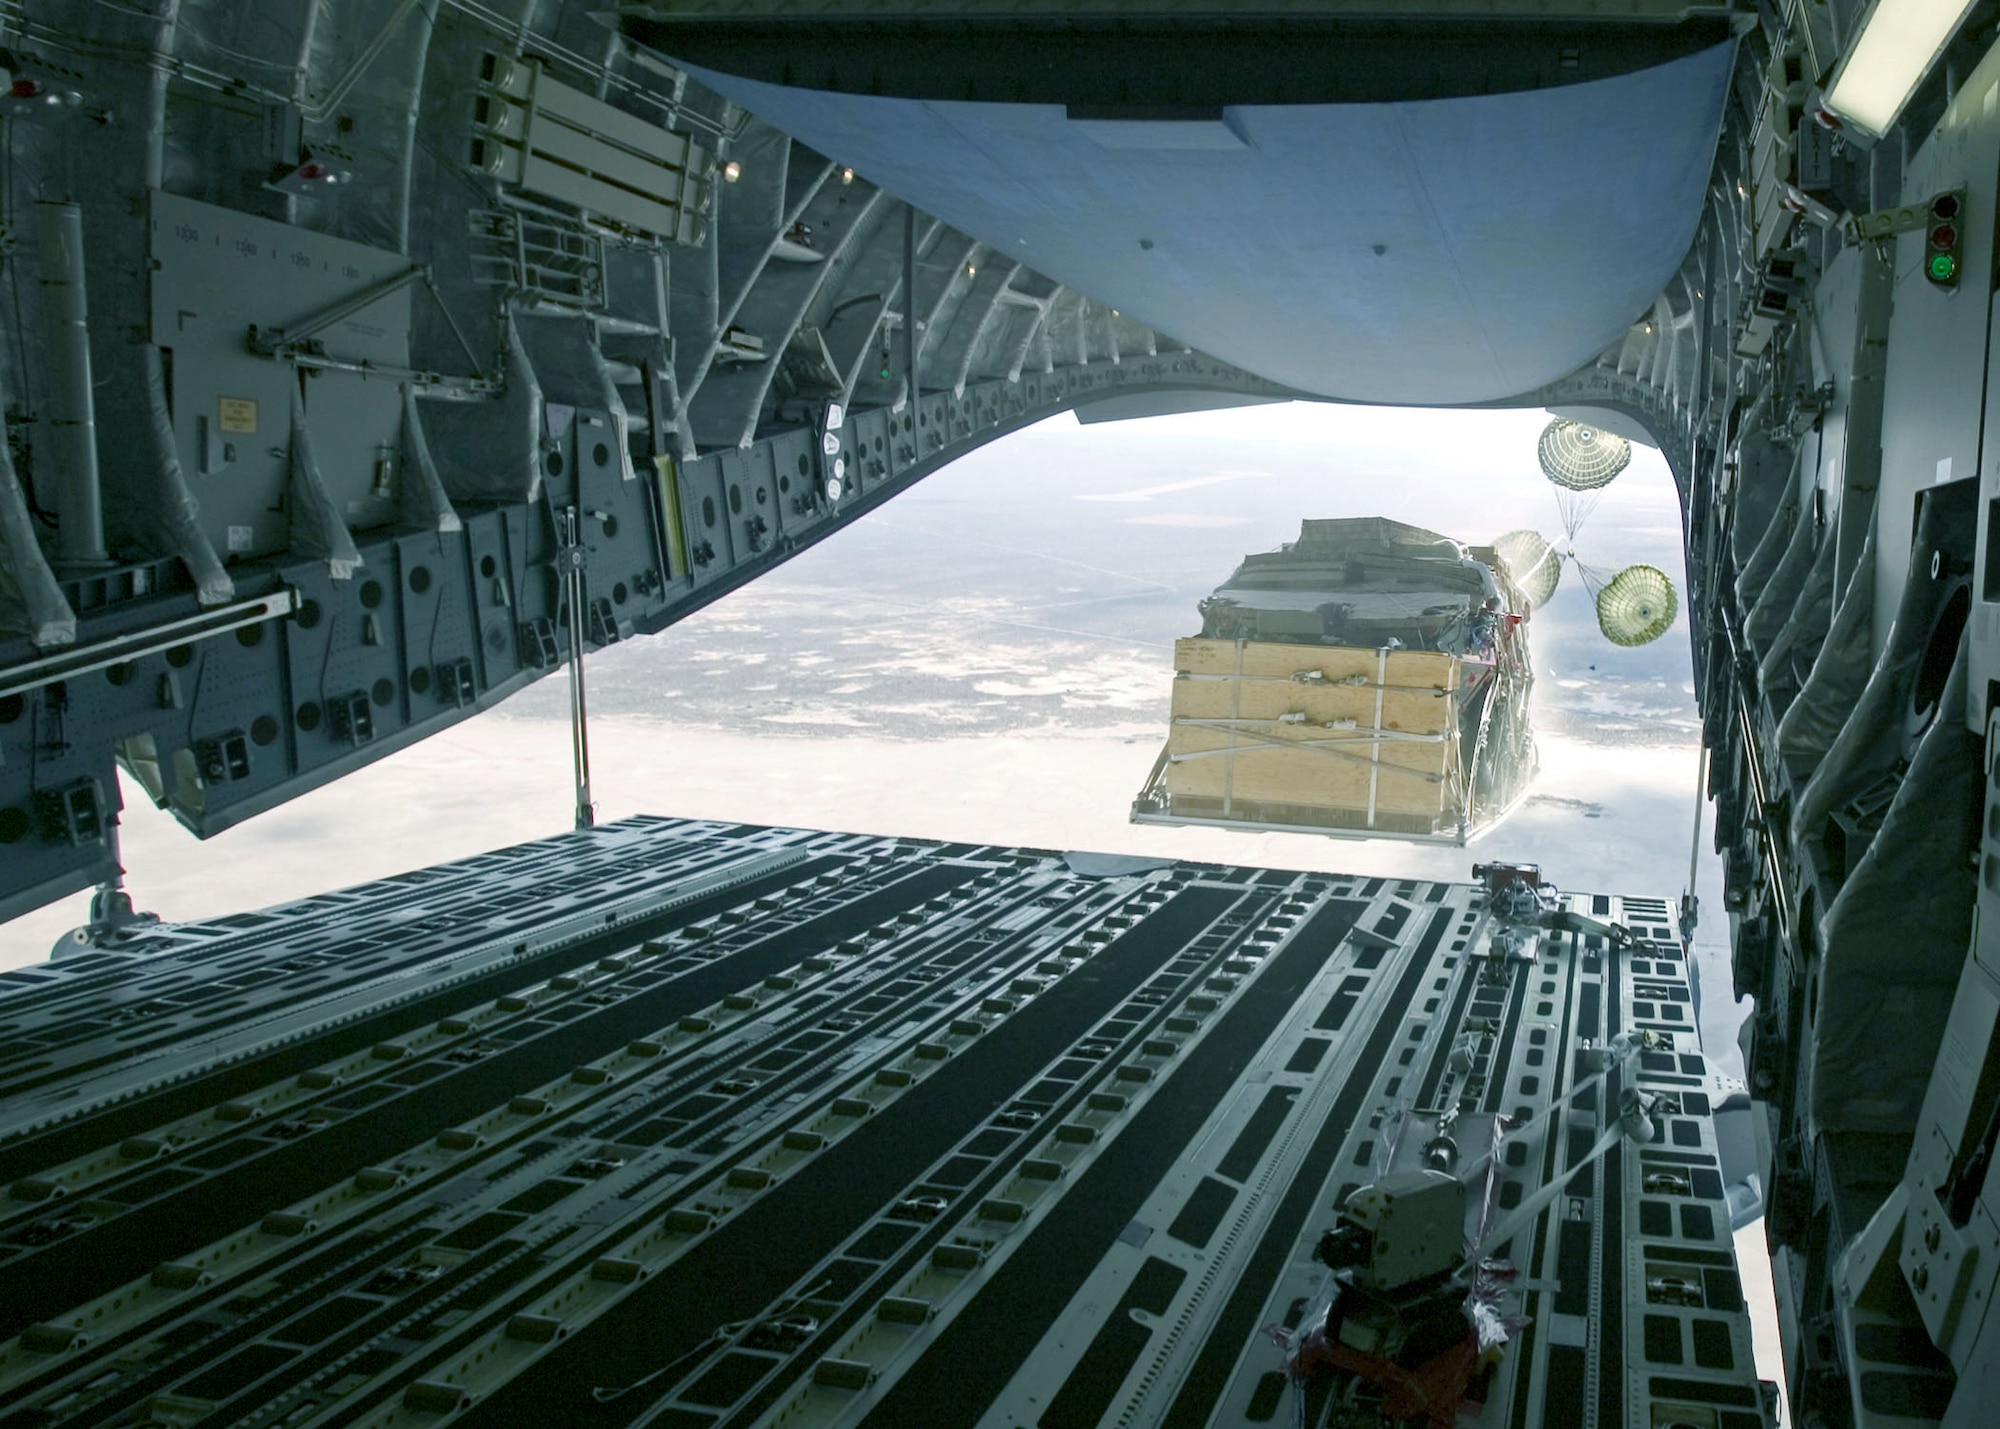 EDWARDS AIR FORCE BASE, Calif. -- An Army Stryker engineer squad vehicle equipped with a mobile gun system is airdropped Aug. 13 from a C-17 Globemaster III from the 418th Flight Test Squadron here.  (U.S. Air Force photo by Kevin Kidd)